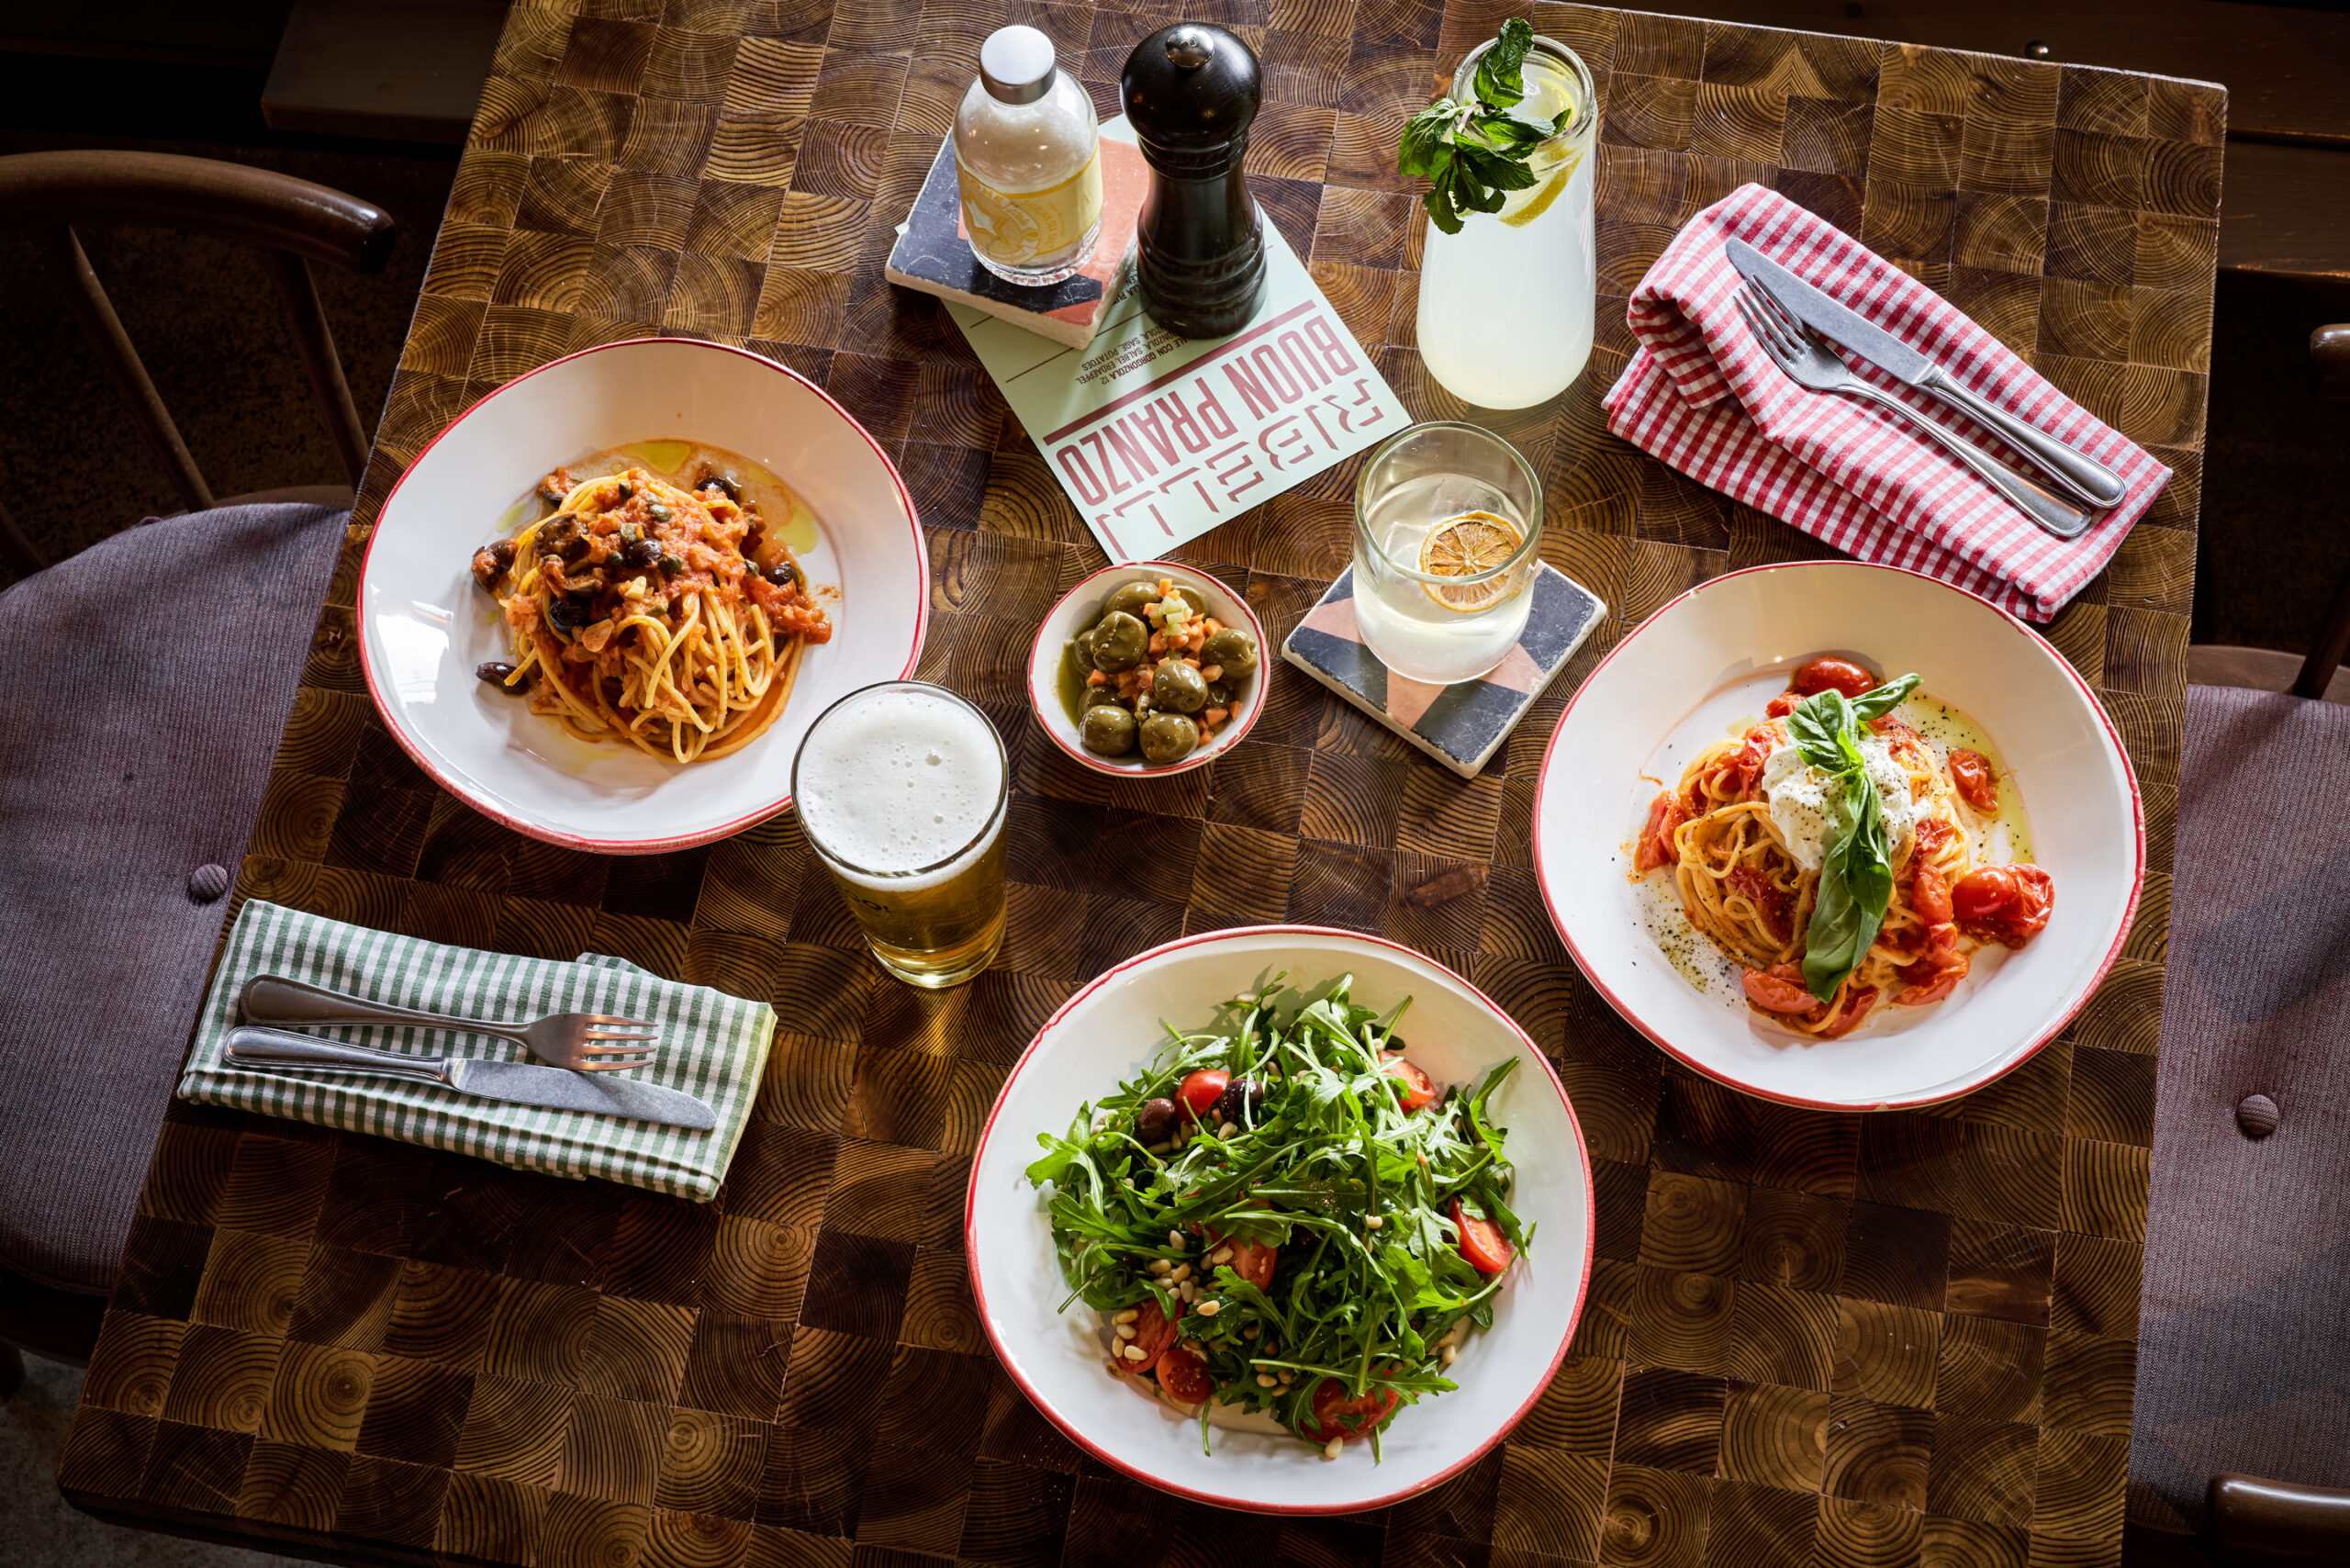 A wooden table with several Italian dishes: pasta, a salad, and olives. Lemonade and beer is next to the plates